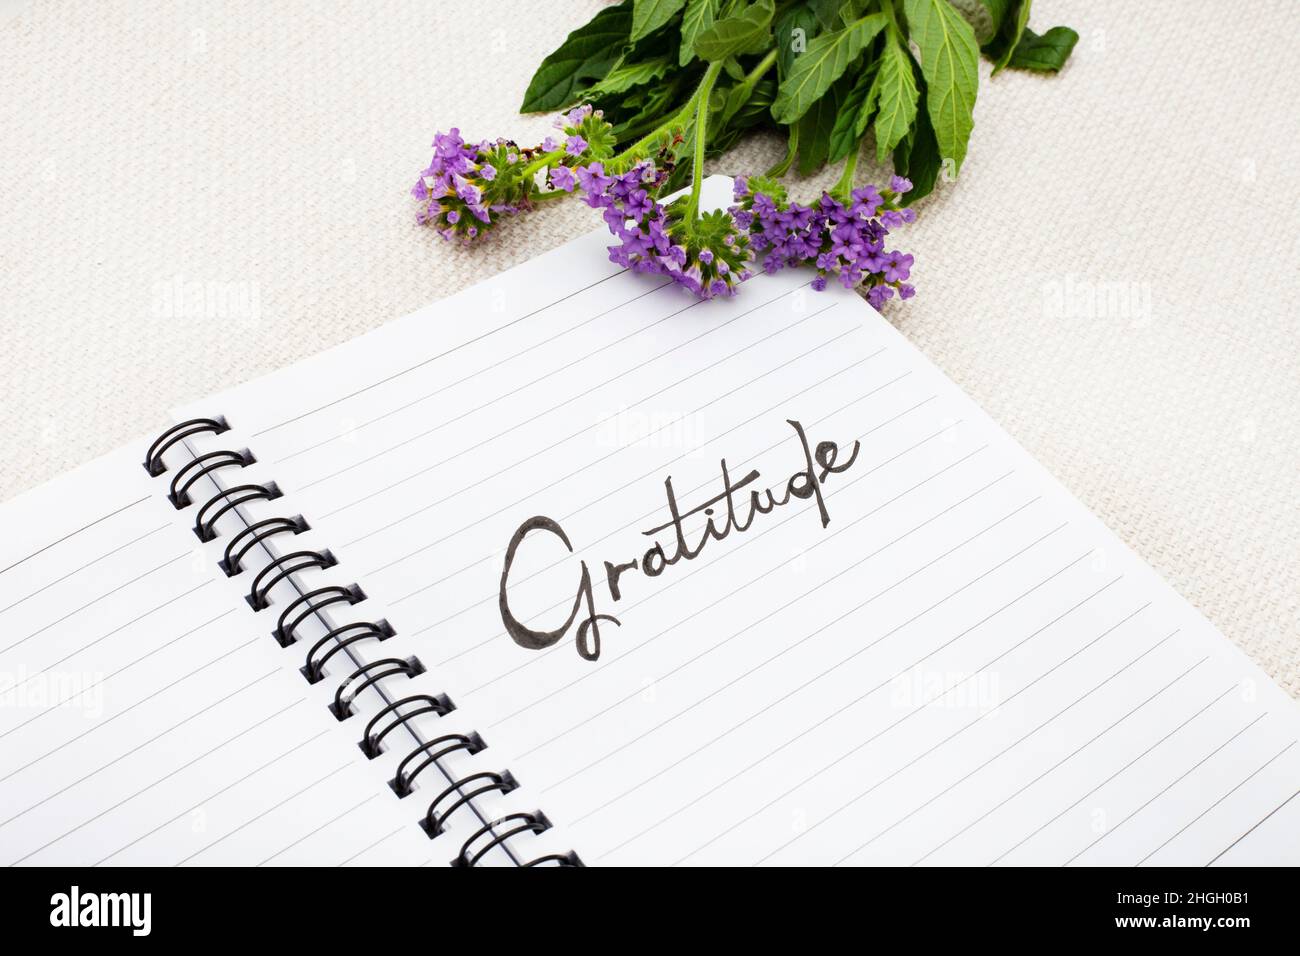 Notebook with the word Gratitude written on it. Placed on a rustic surface Stock Photo